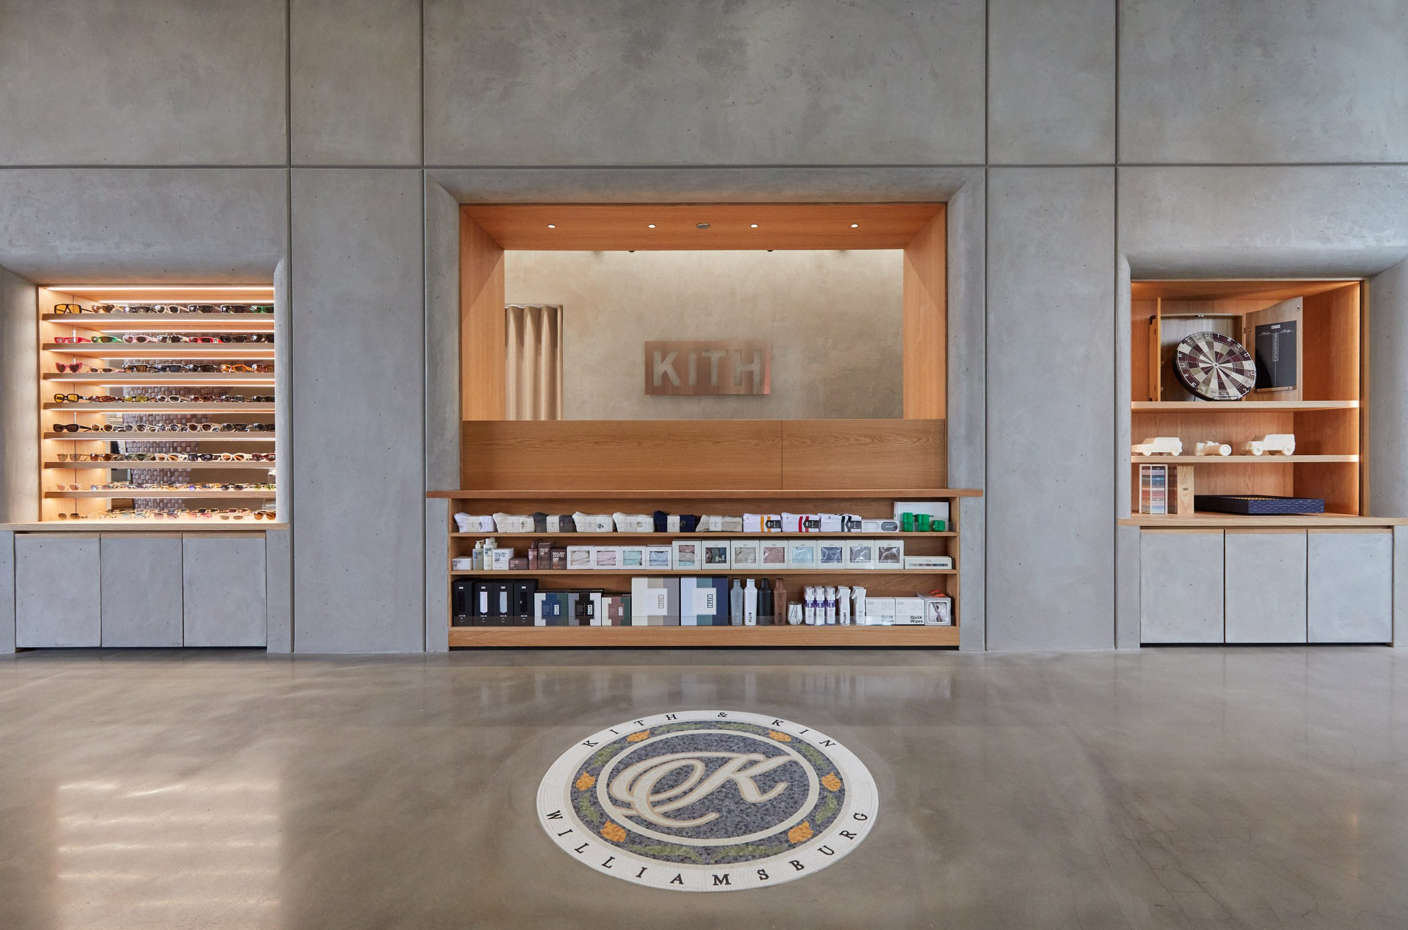 The Kith logo on the floor is the store's identity